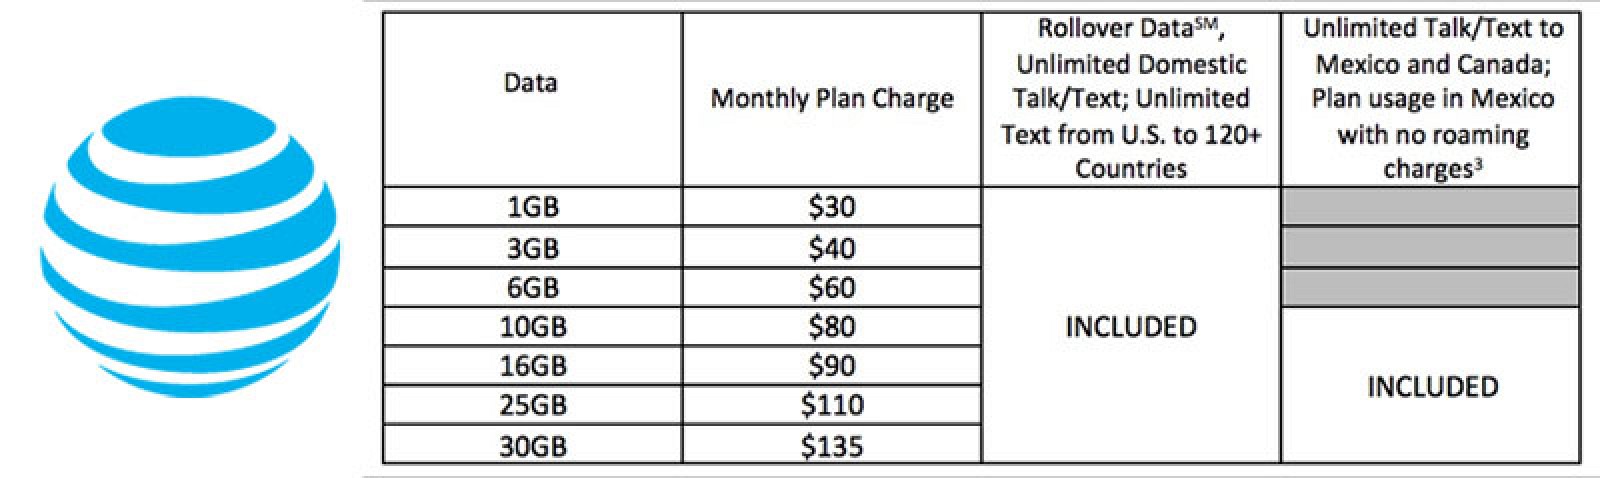 AT&T Introduces New Data Plans Without Overage Charges ...